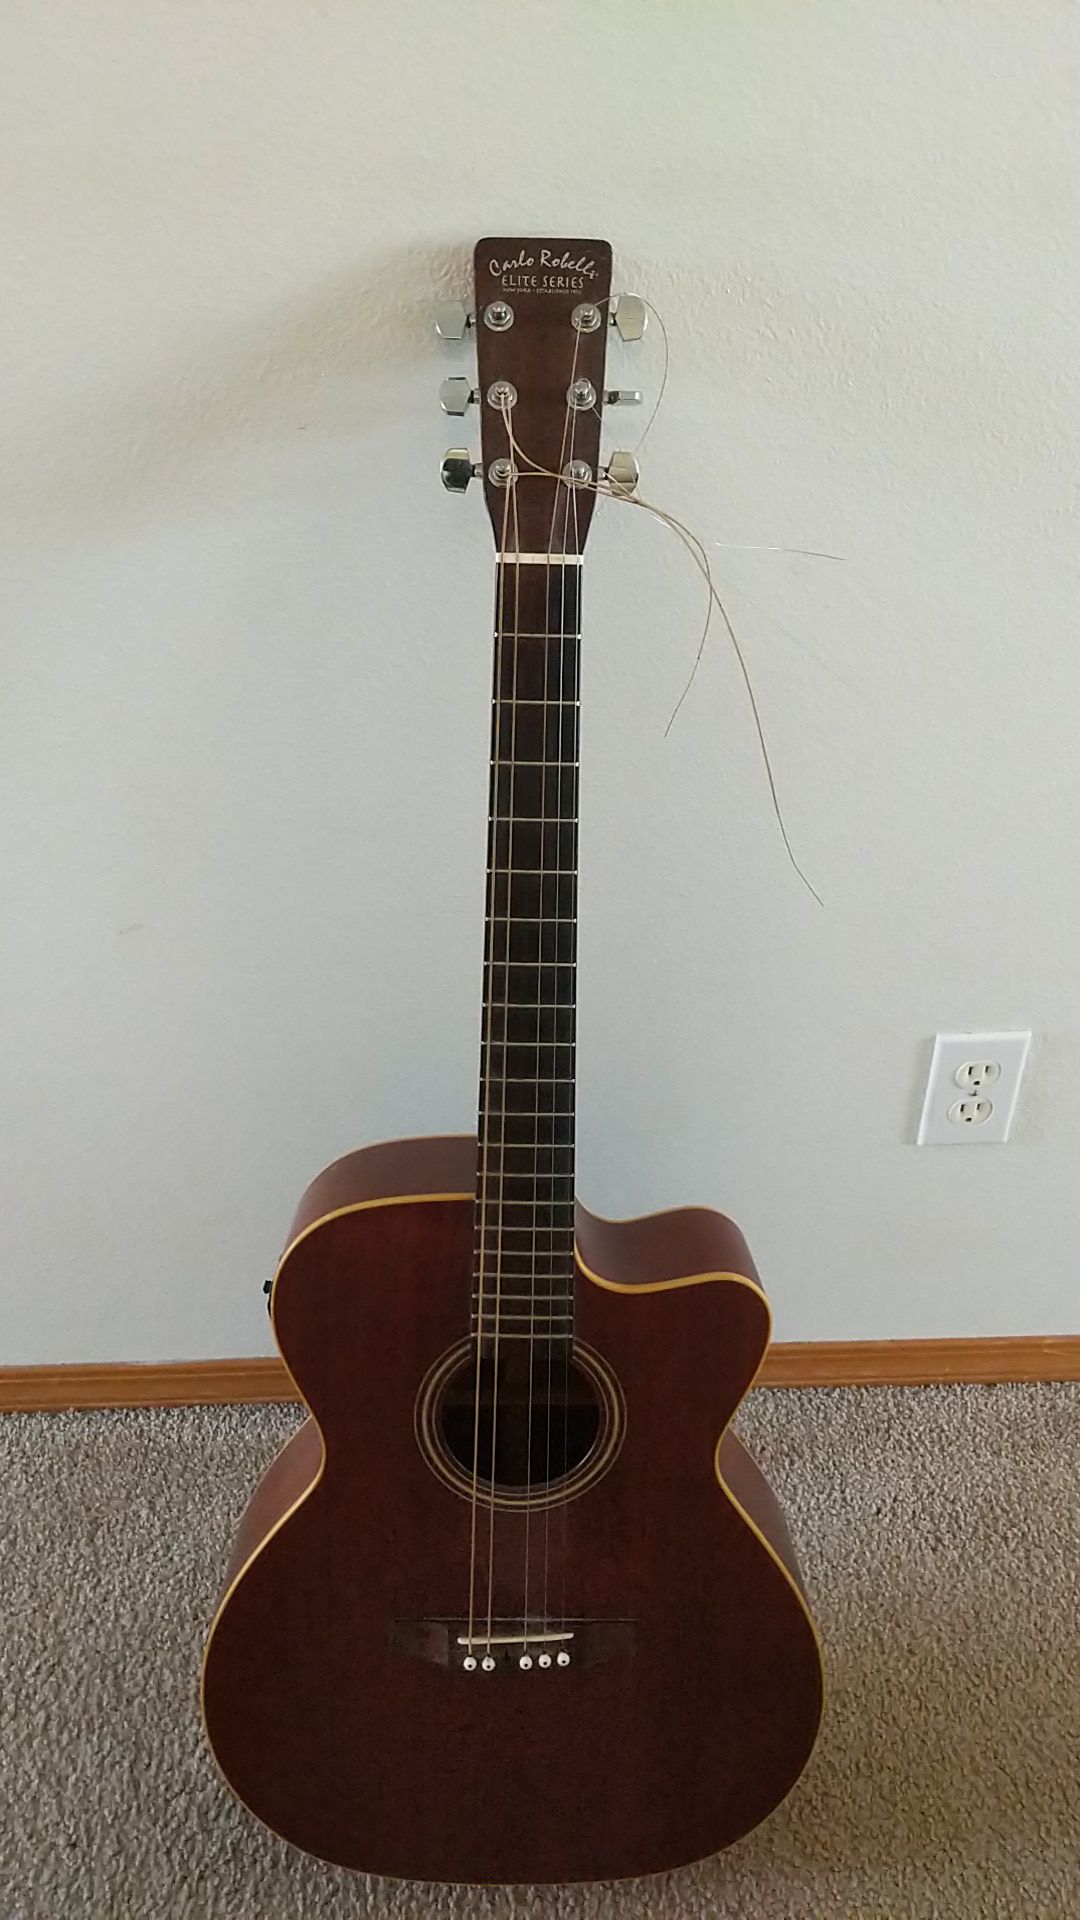 Carlos Robelli Acoustic. Needs some love